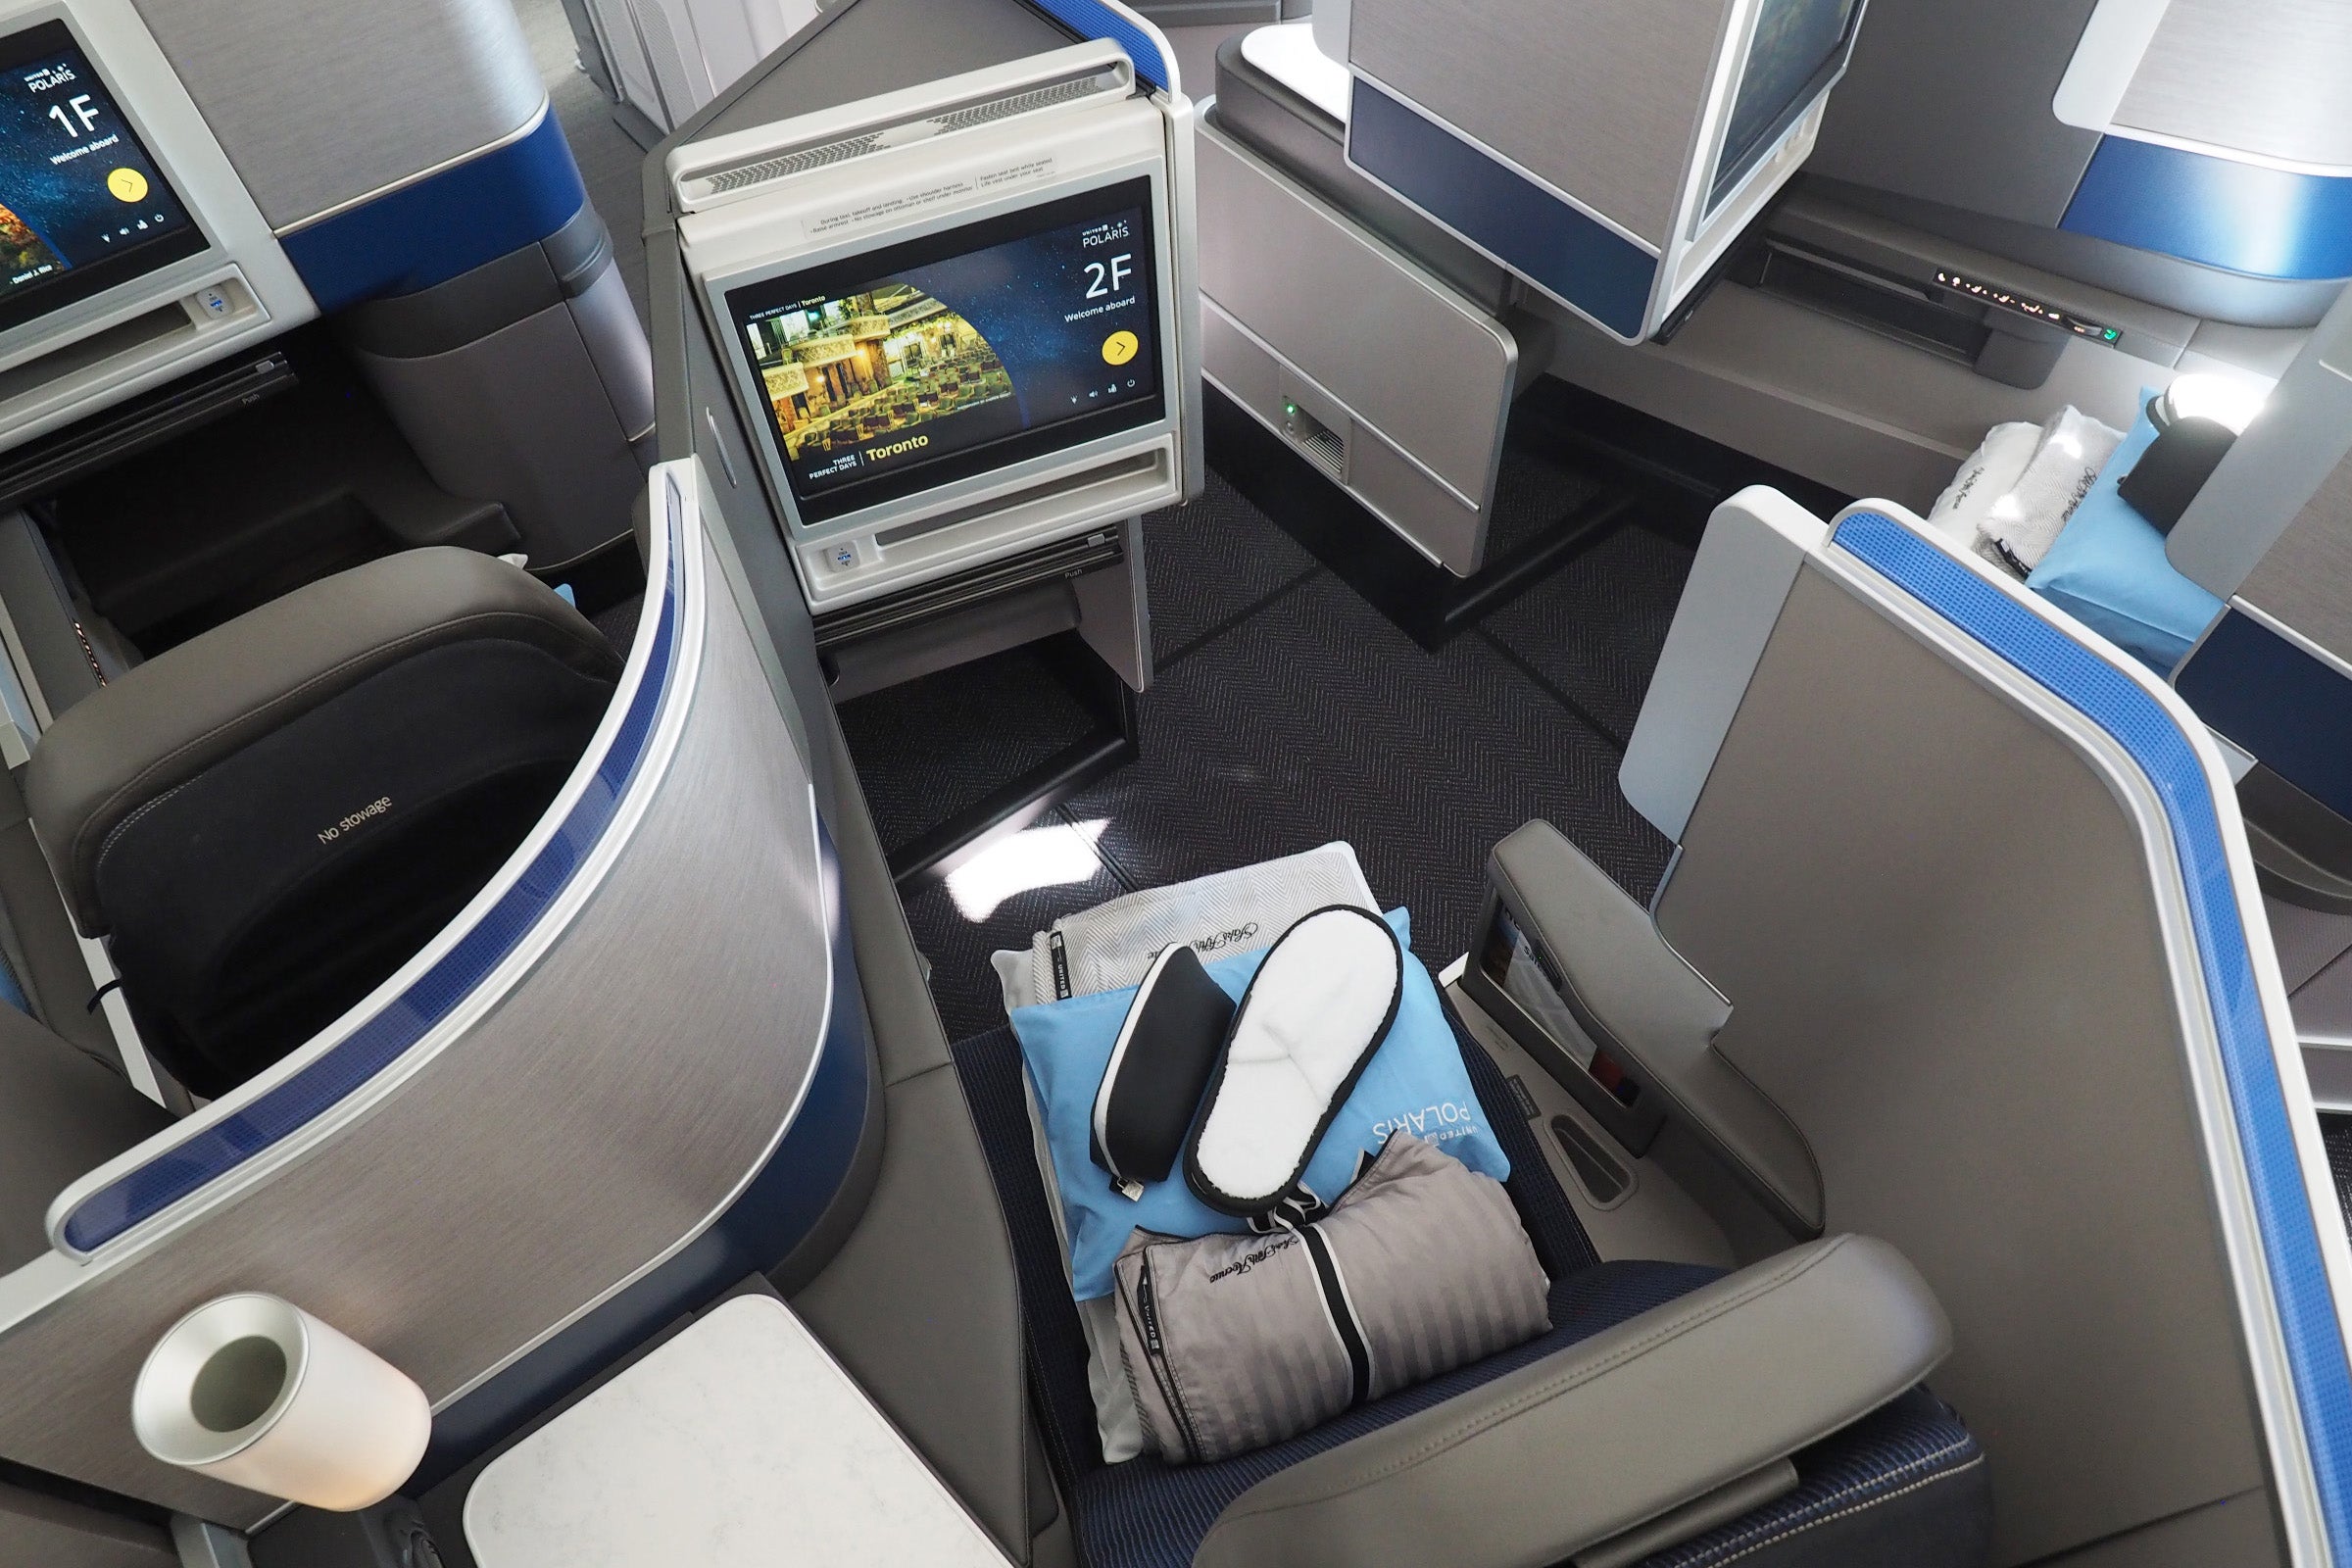 See if you're eligible for a status shortcut with United's latest elite promos